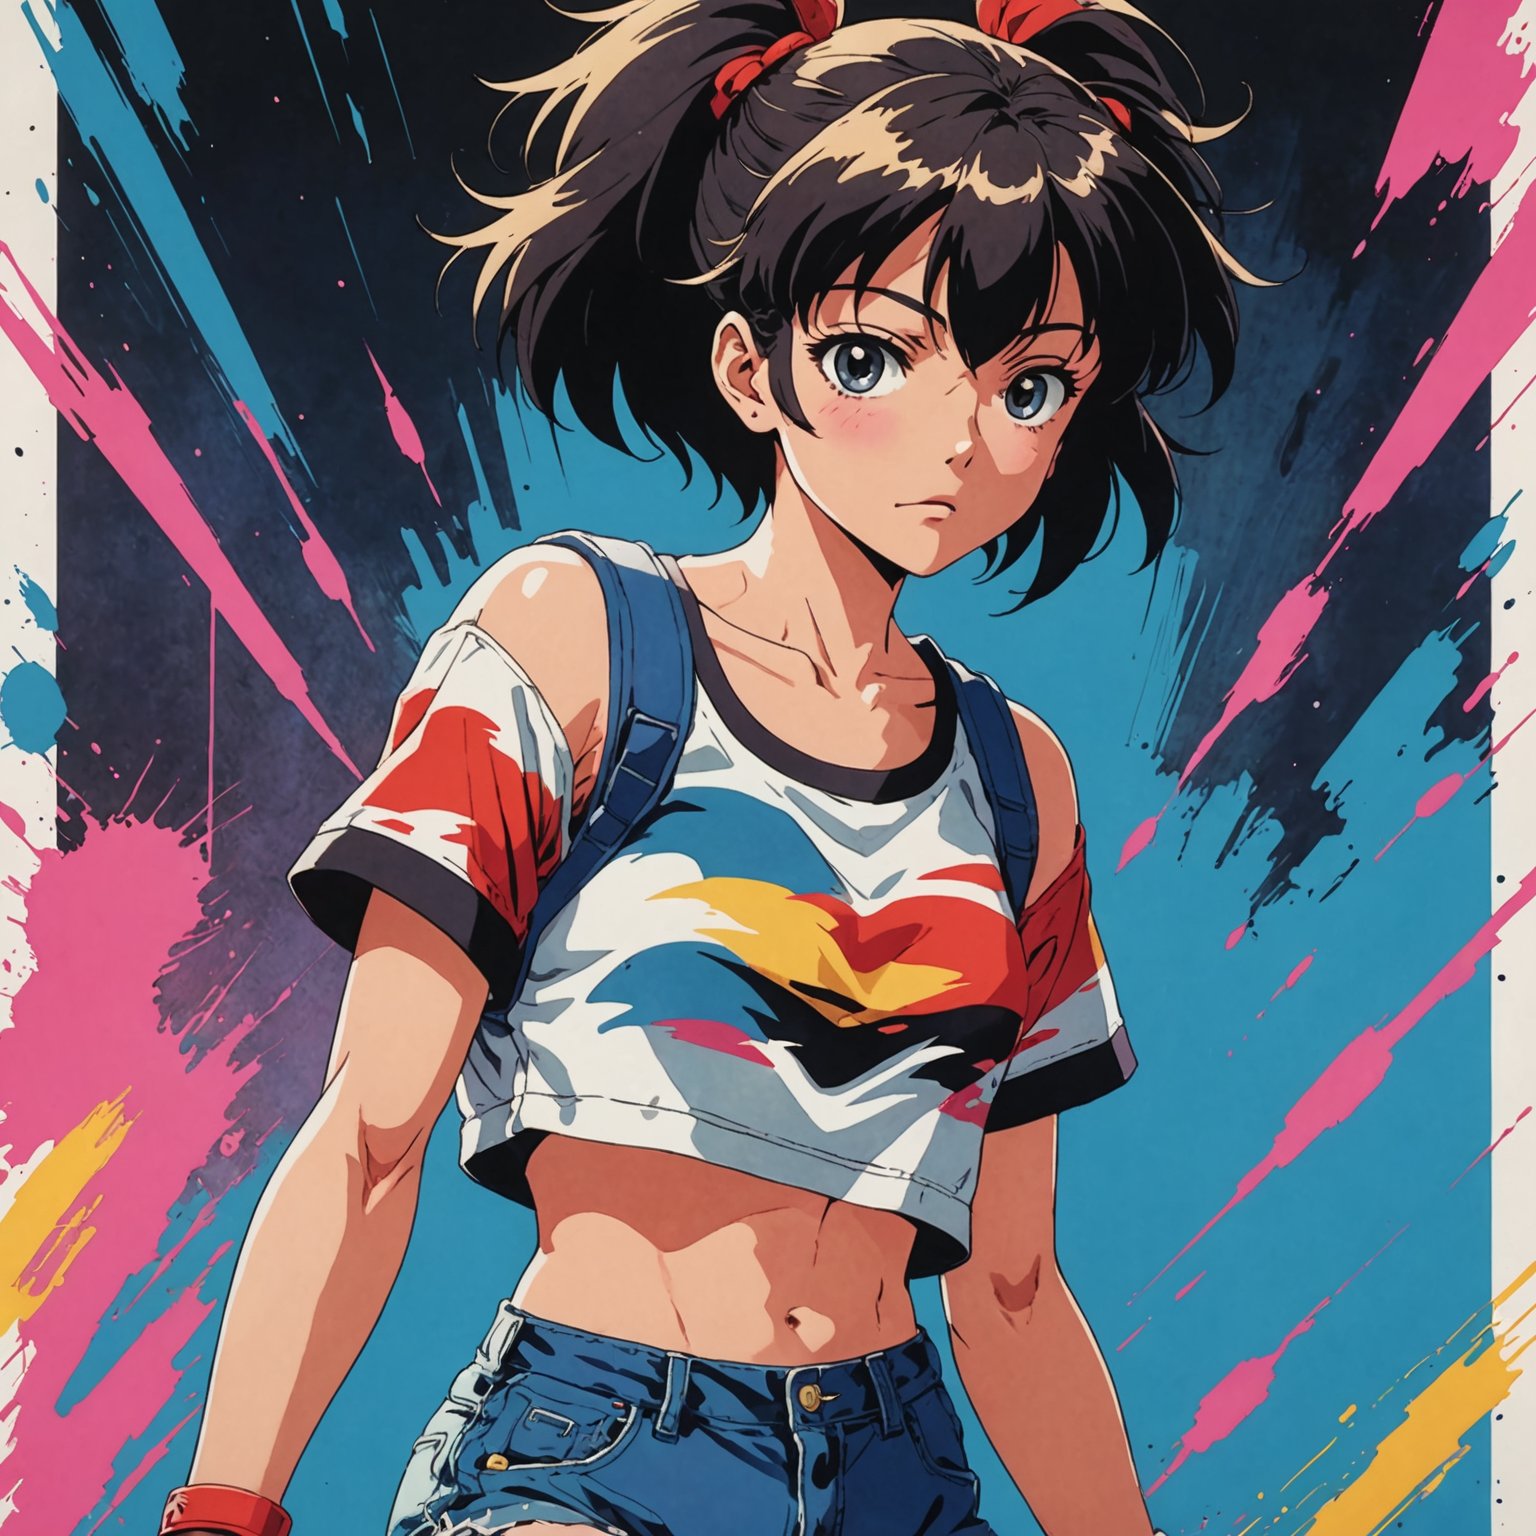 80's anime screencap, girl wearing a cropped top and short shorts, artistic rendition with wide brush strokes, anime comic